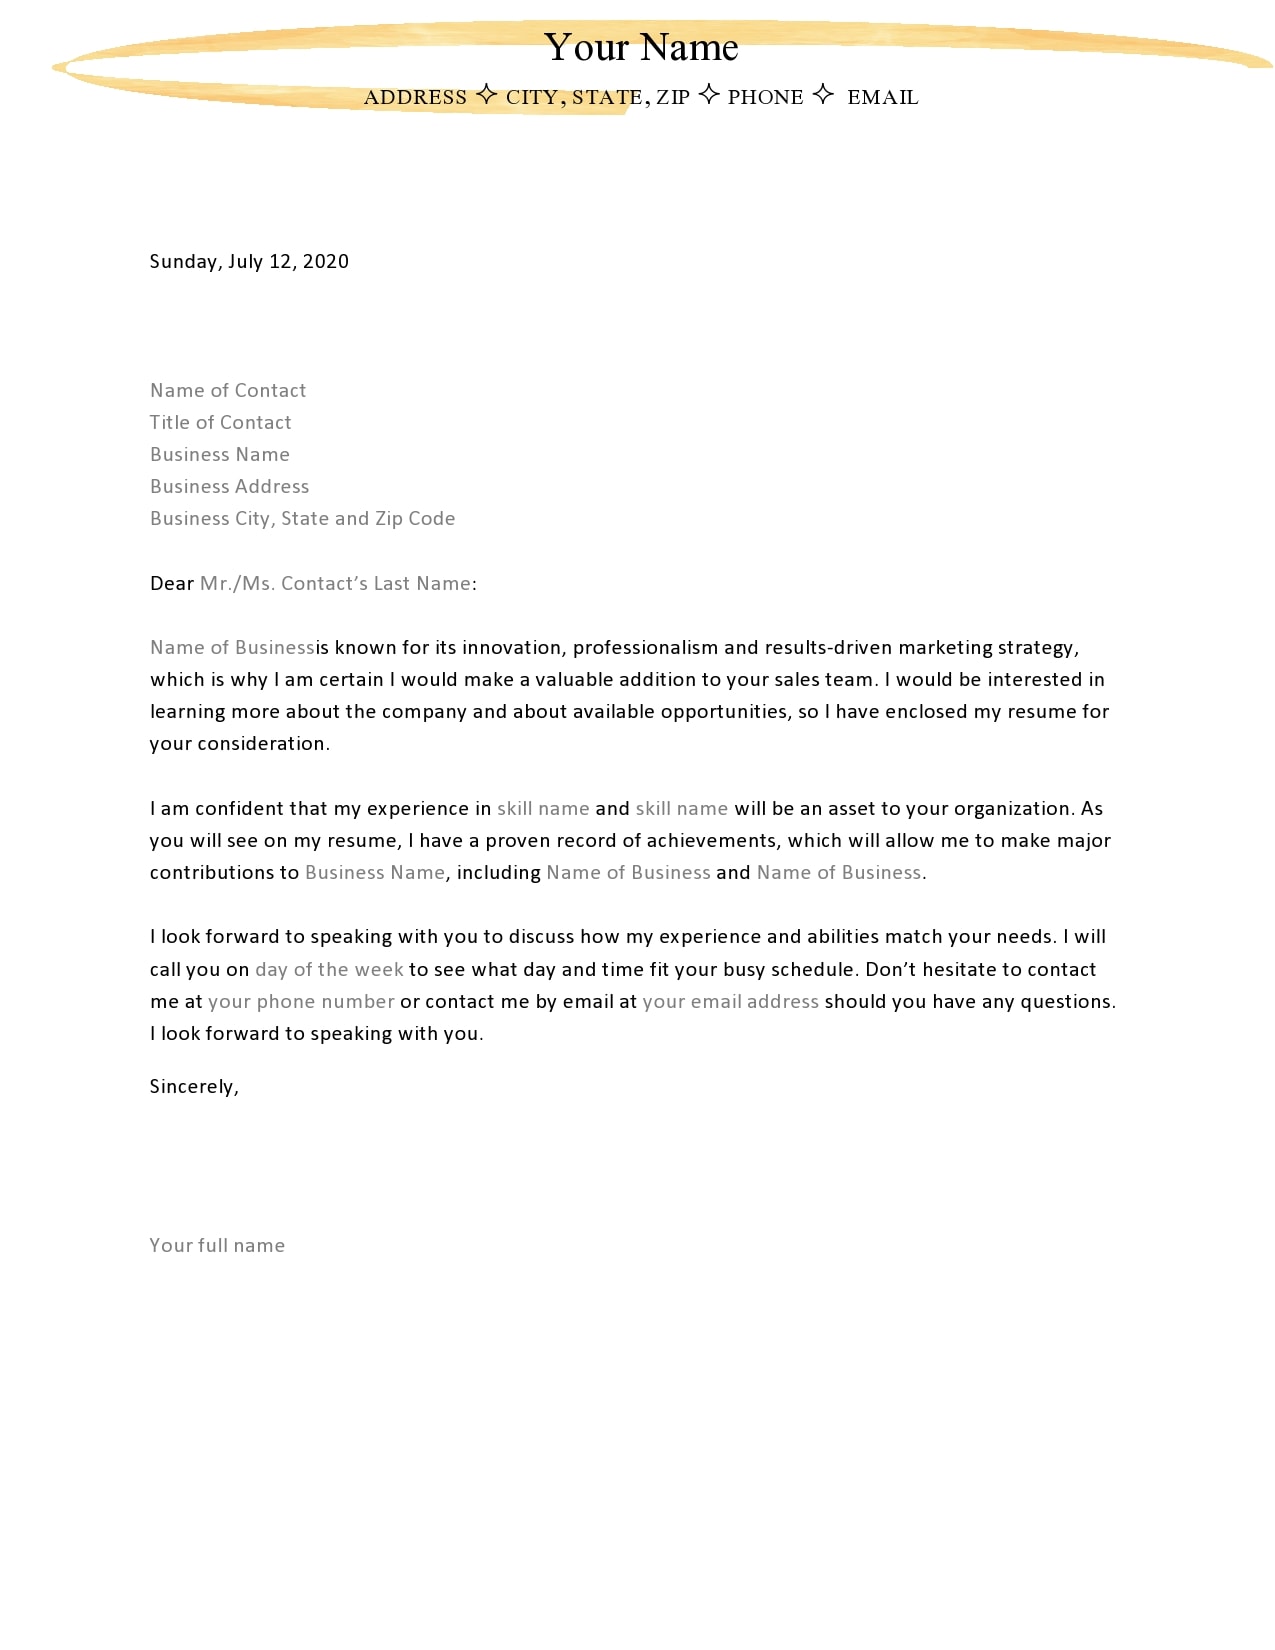 20 Editable Letter of Interest for a Job Templates - TemplateArchive Within Letter Of Interest Template Microsoft Word